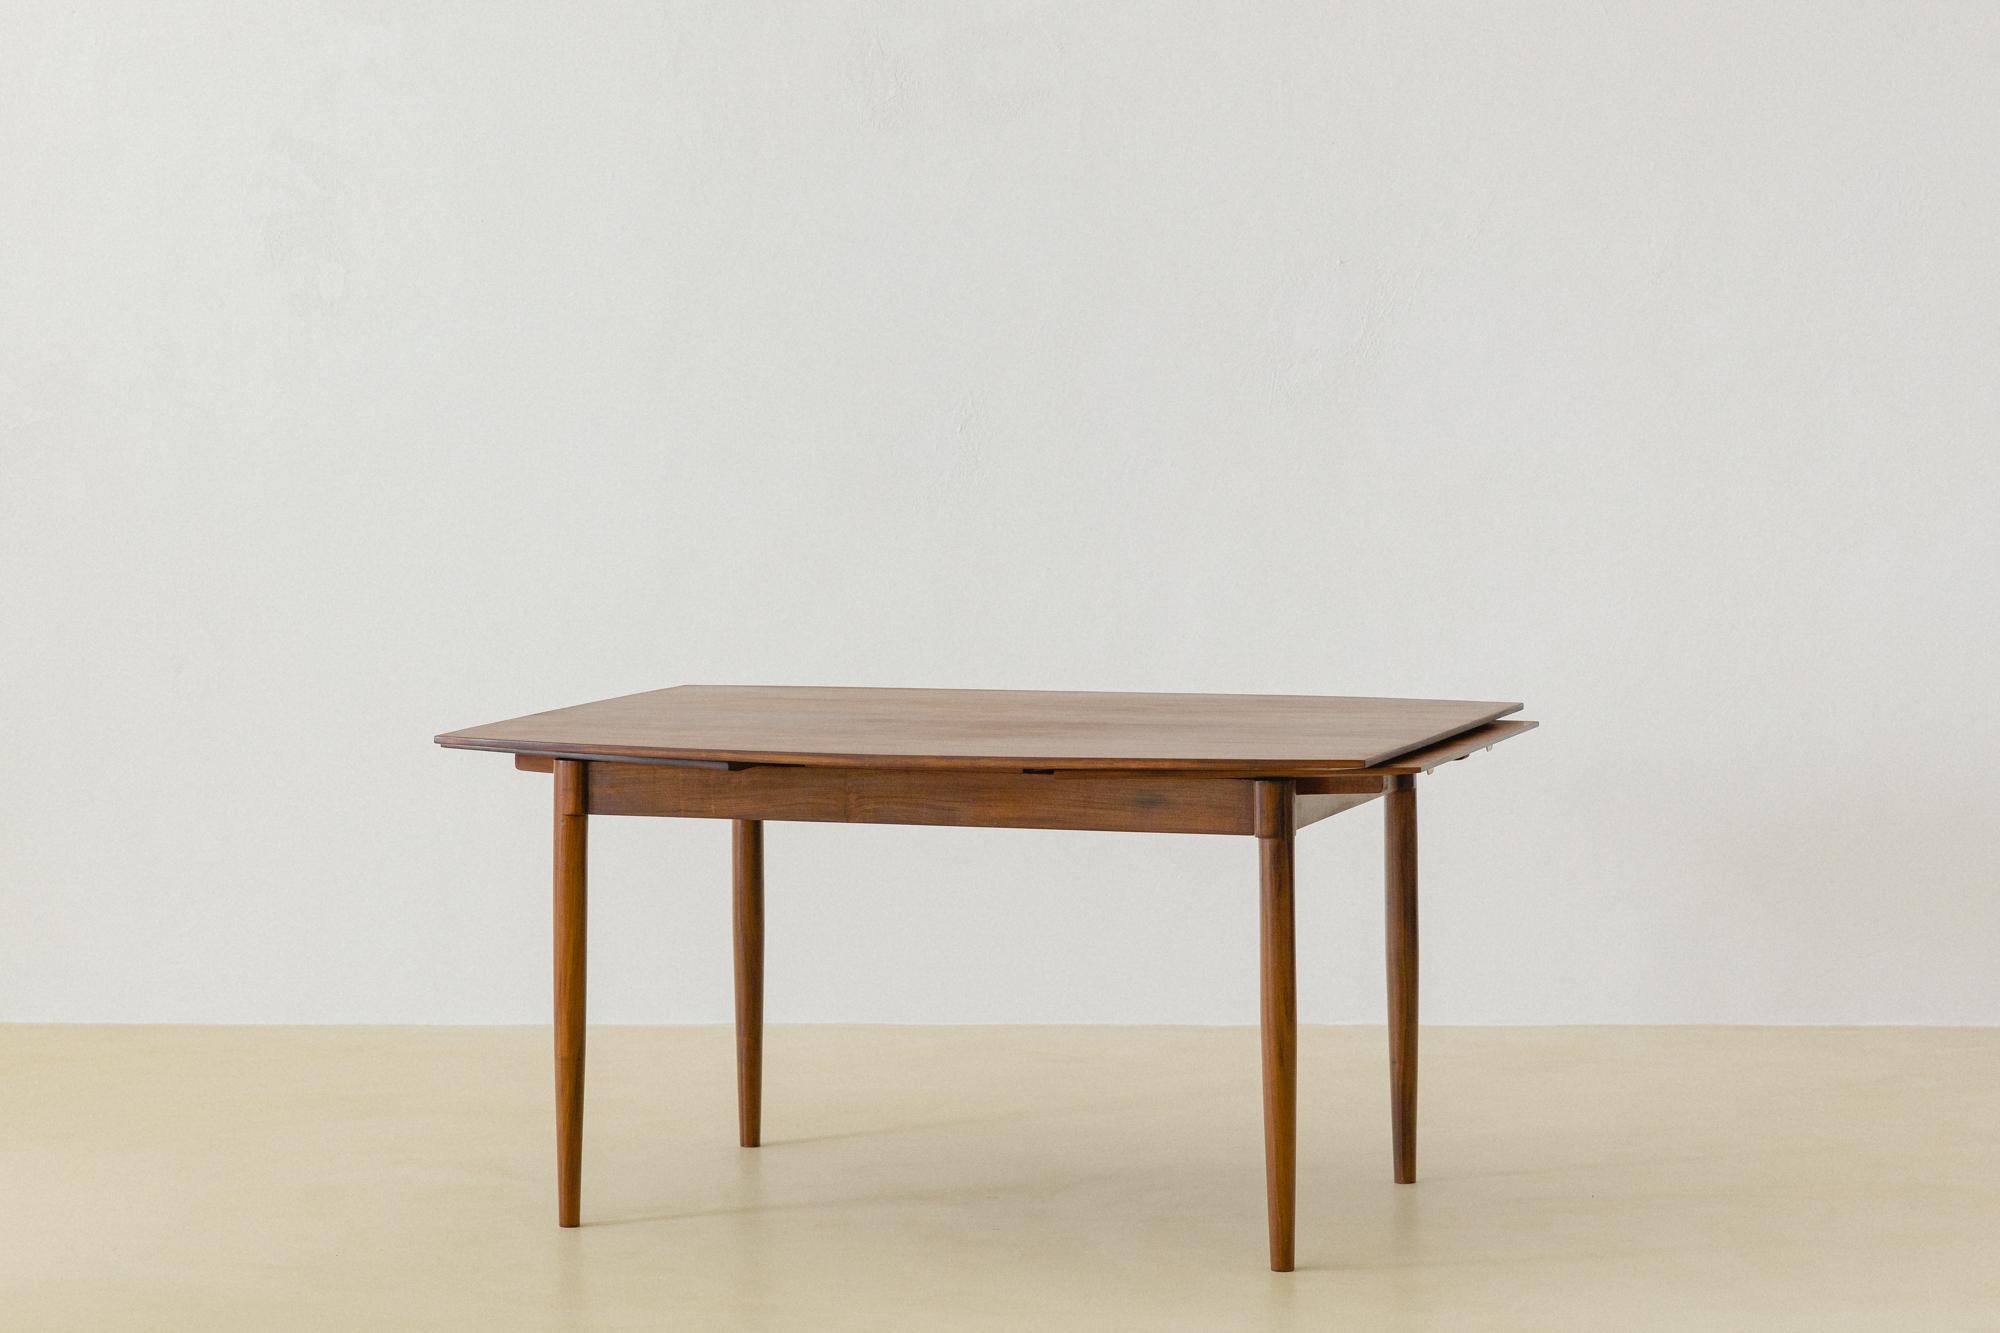 Mid-Century Modern Expandable Dining Table in Caviuna by Carlo Hauner, Brazilian Midcentury, 1950s For Sale